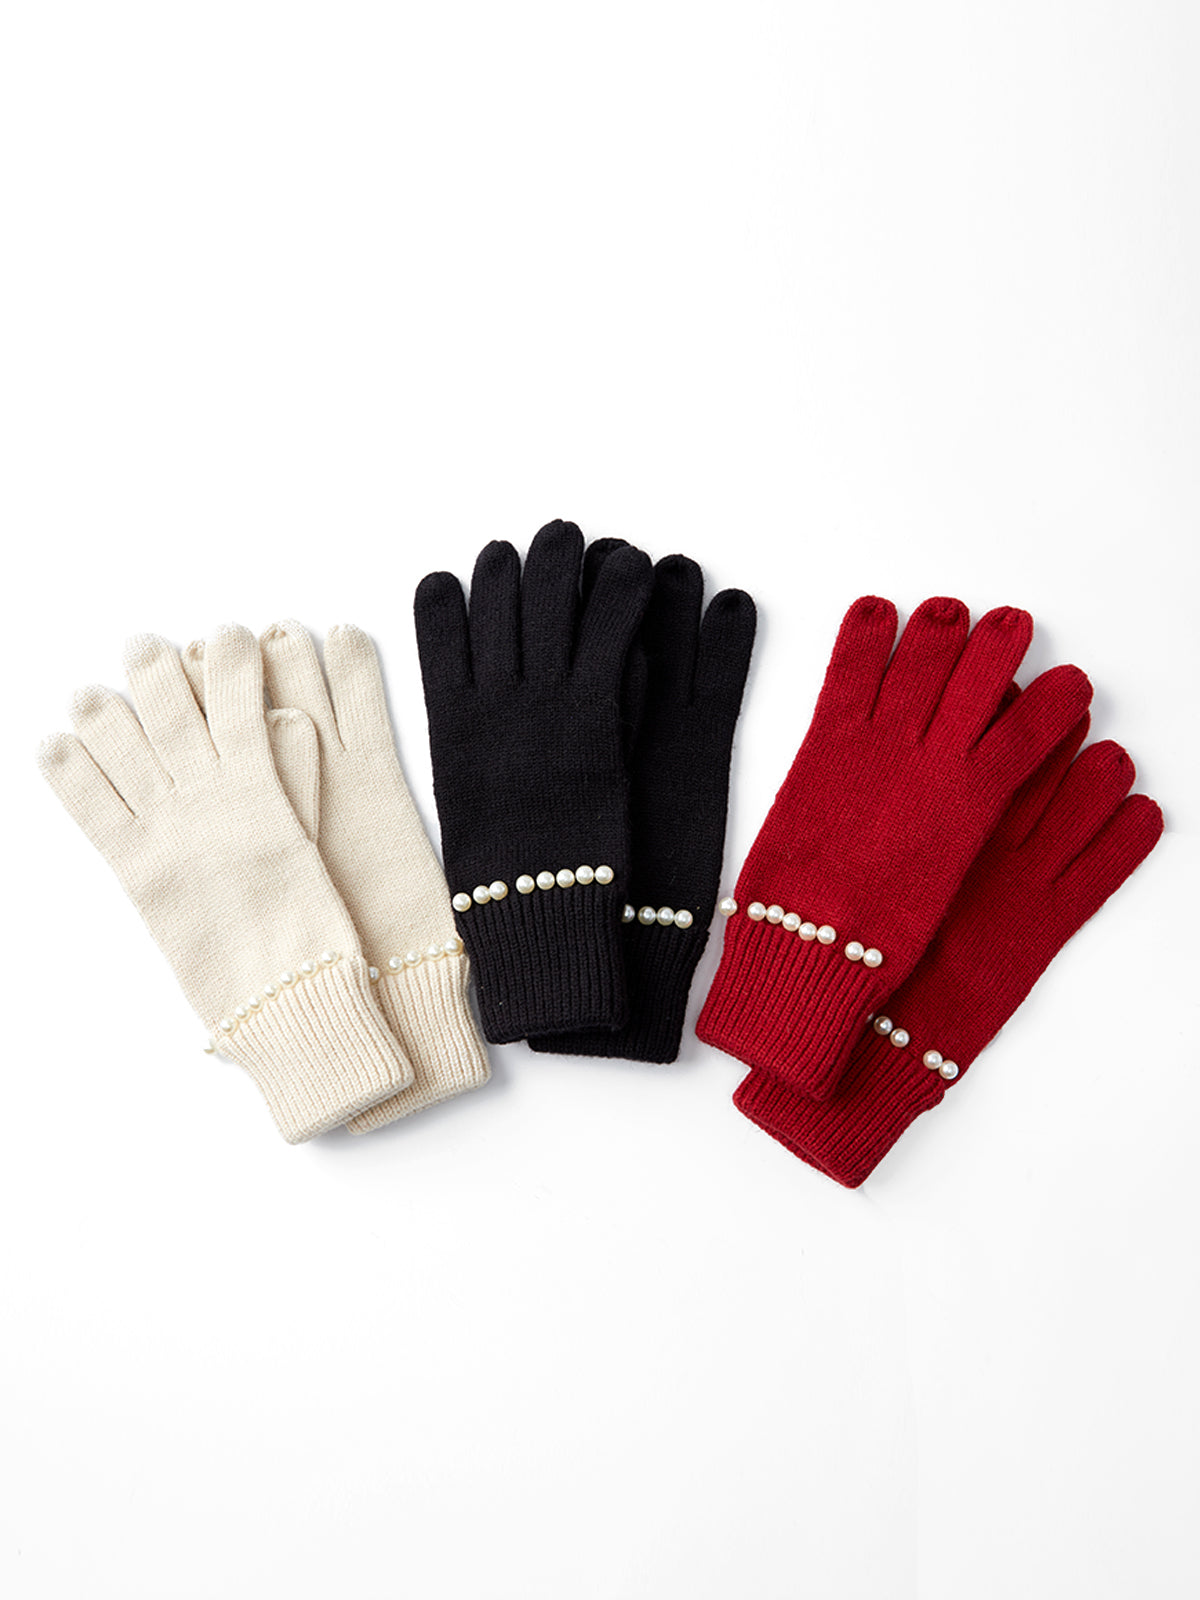 Knit Gloves With Pearls